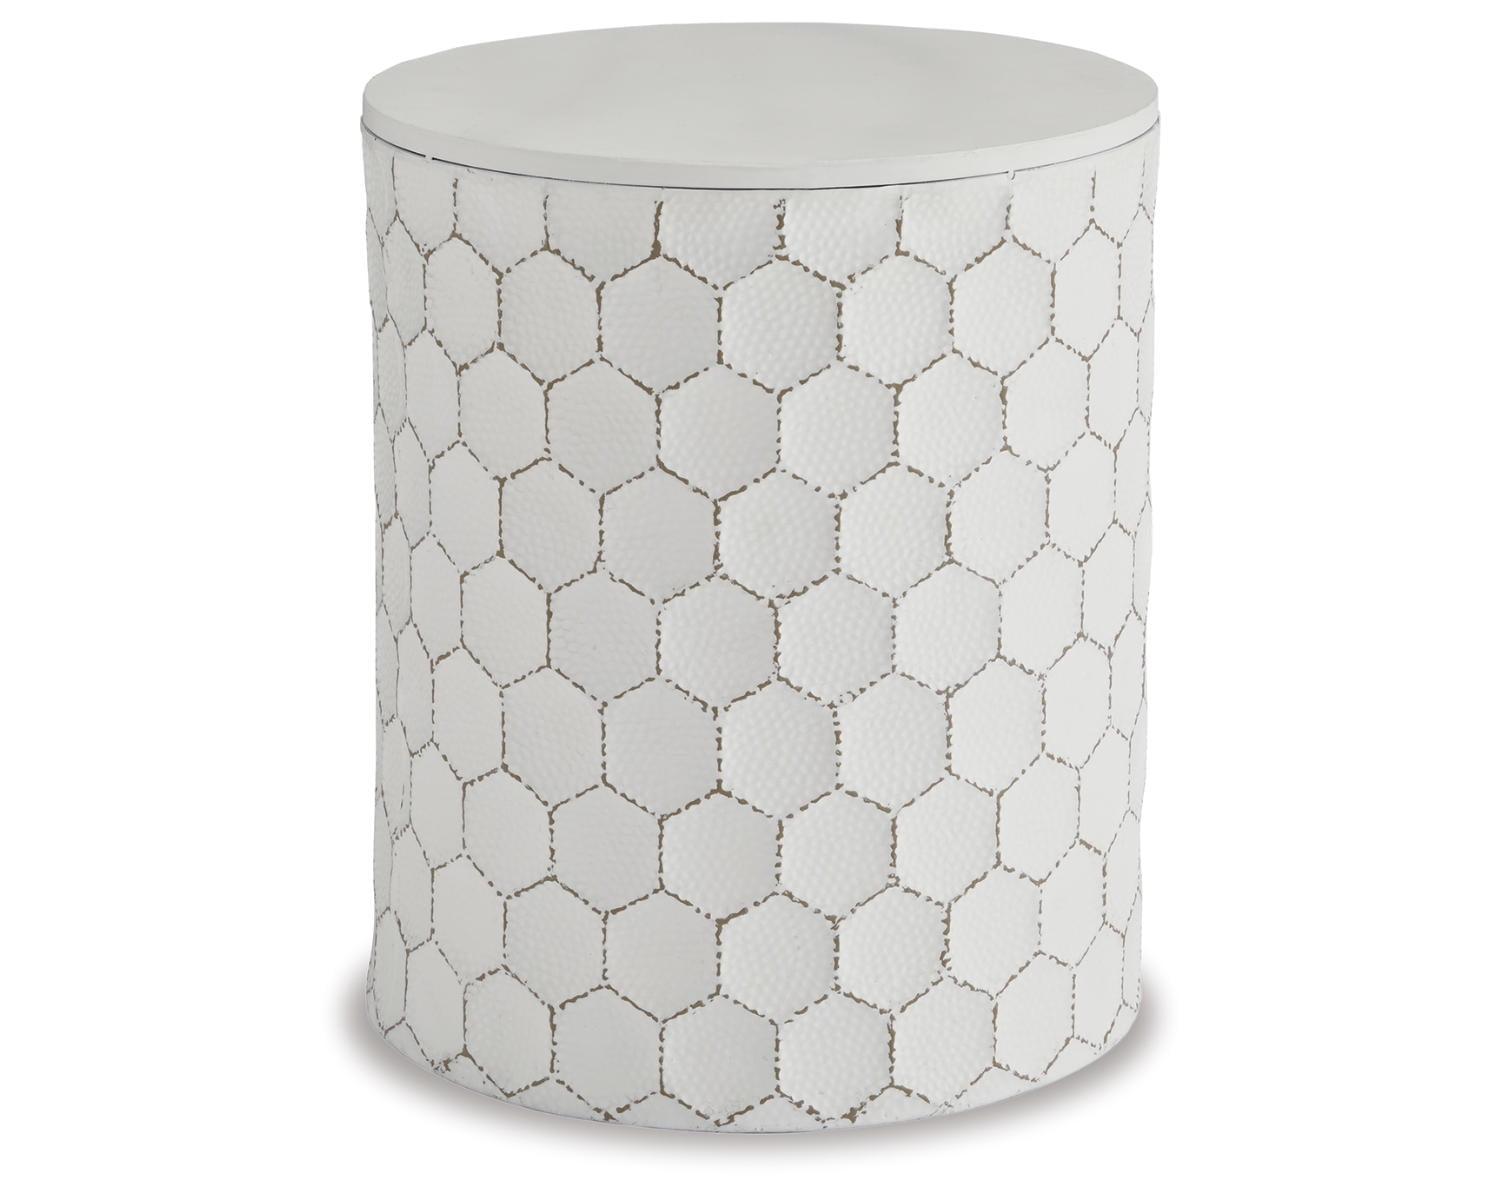 Contemporary Honeycomb Hammered Metal Accent Stool in White